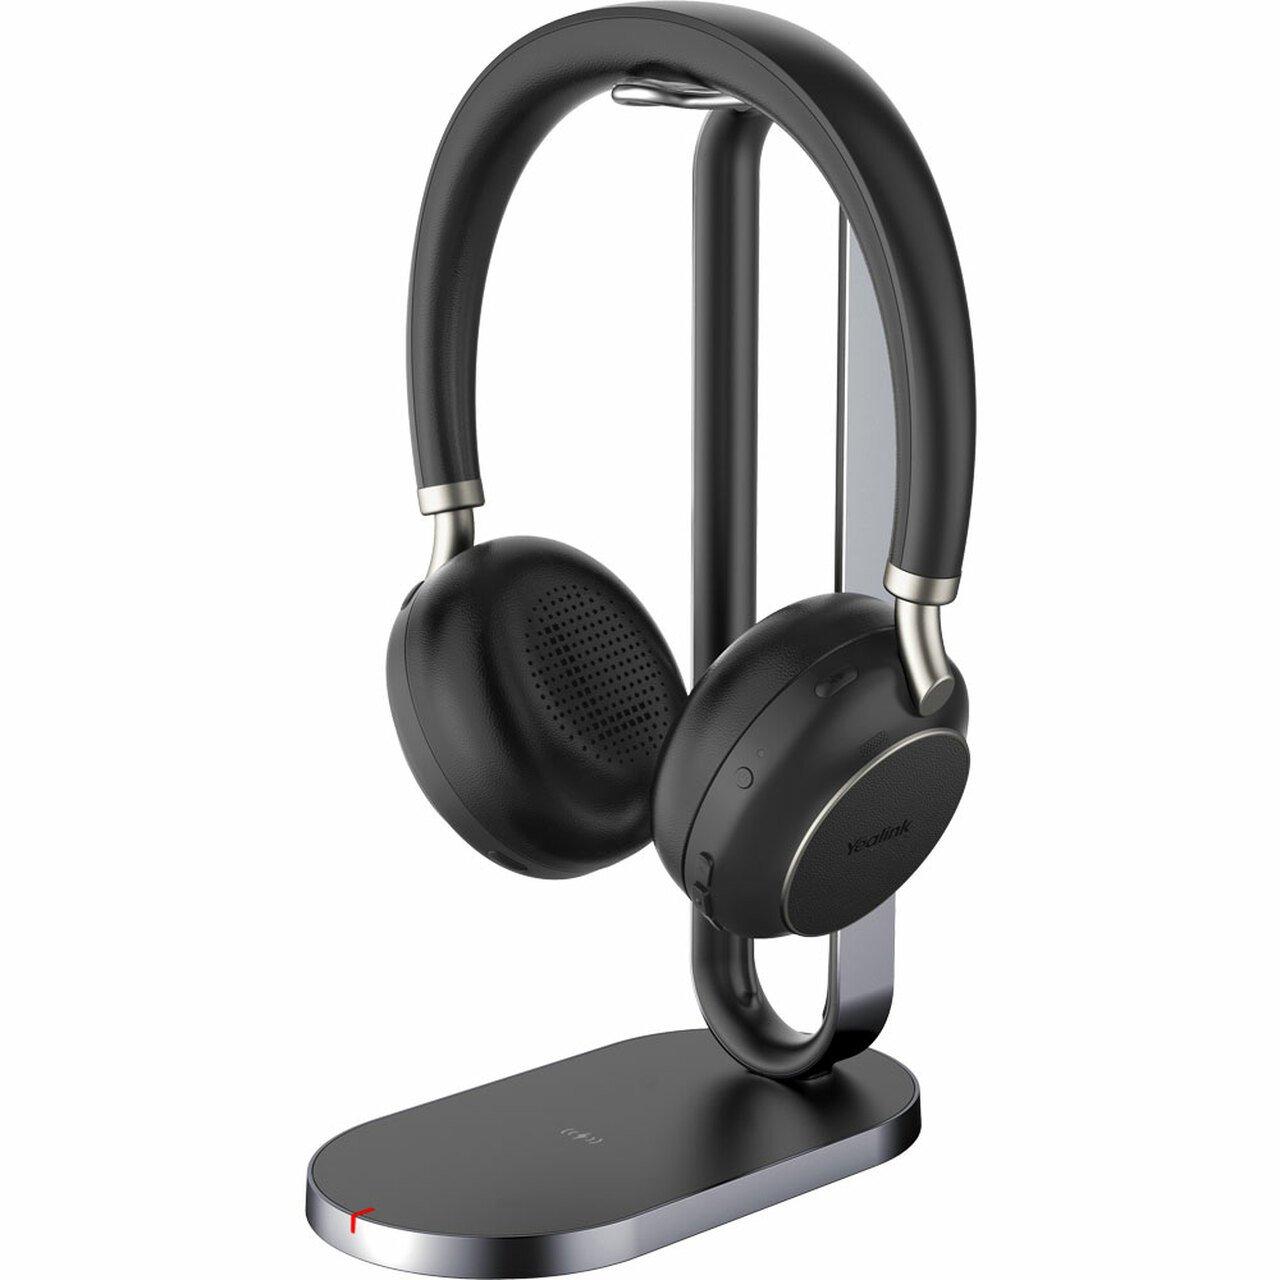  Yealink BH76 Bluetooth Headset with Stand